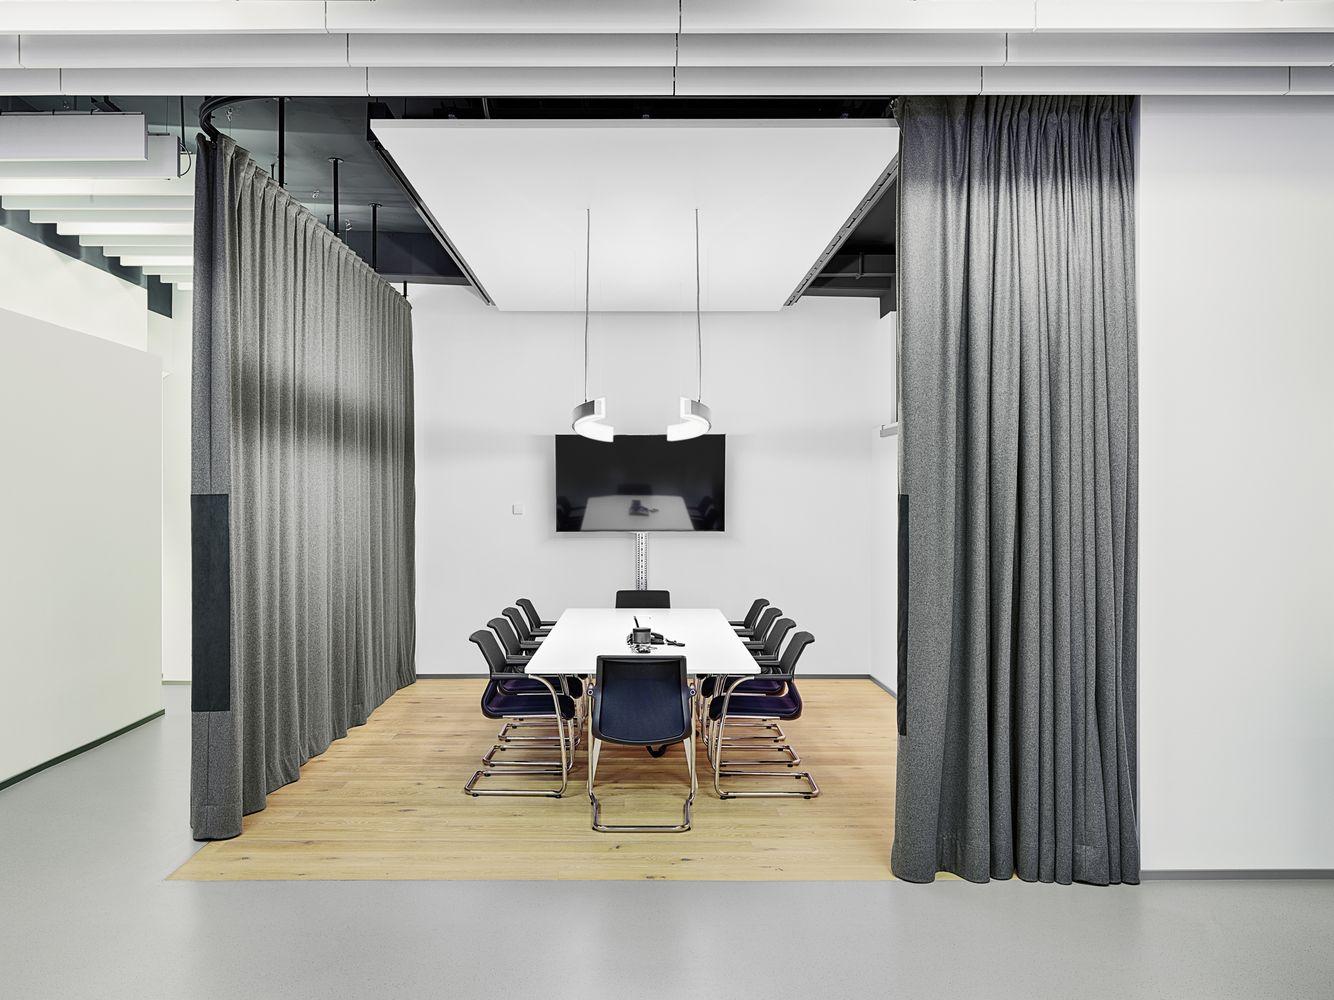 Variable room acoustics for meeting rooms and think tanks by means of soundproof curtains